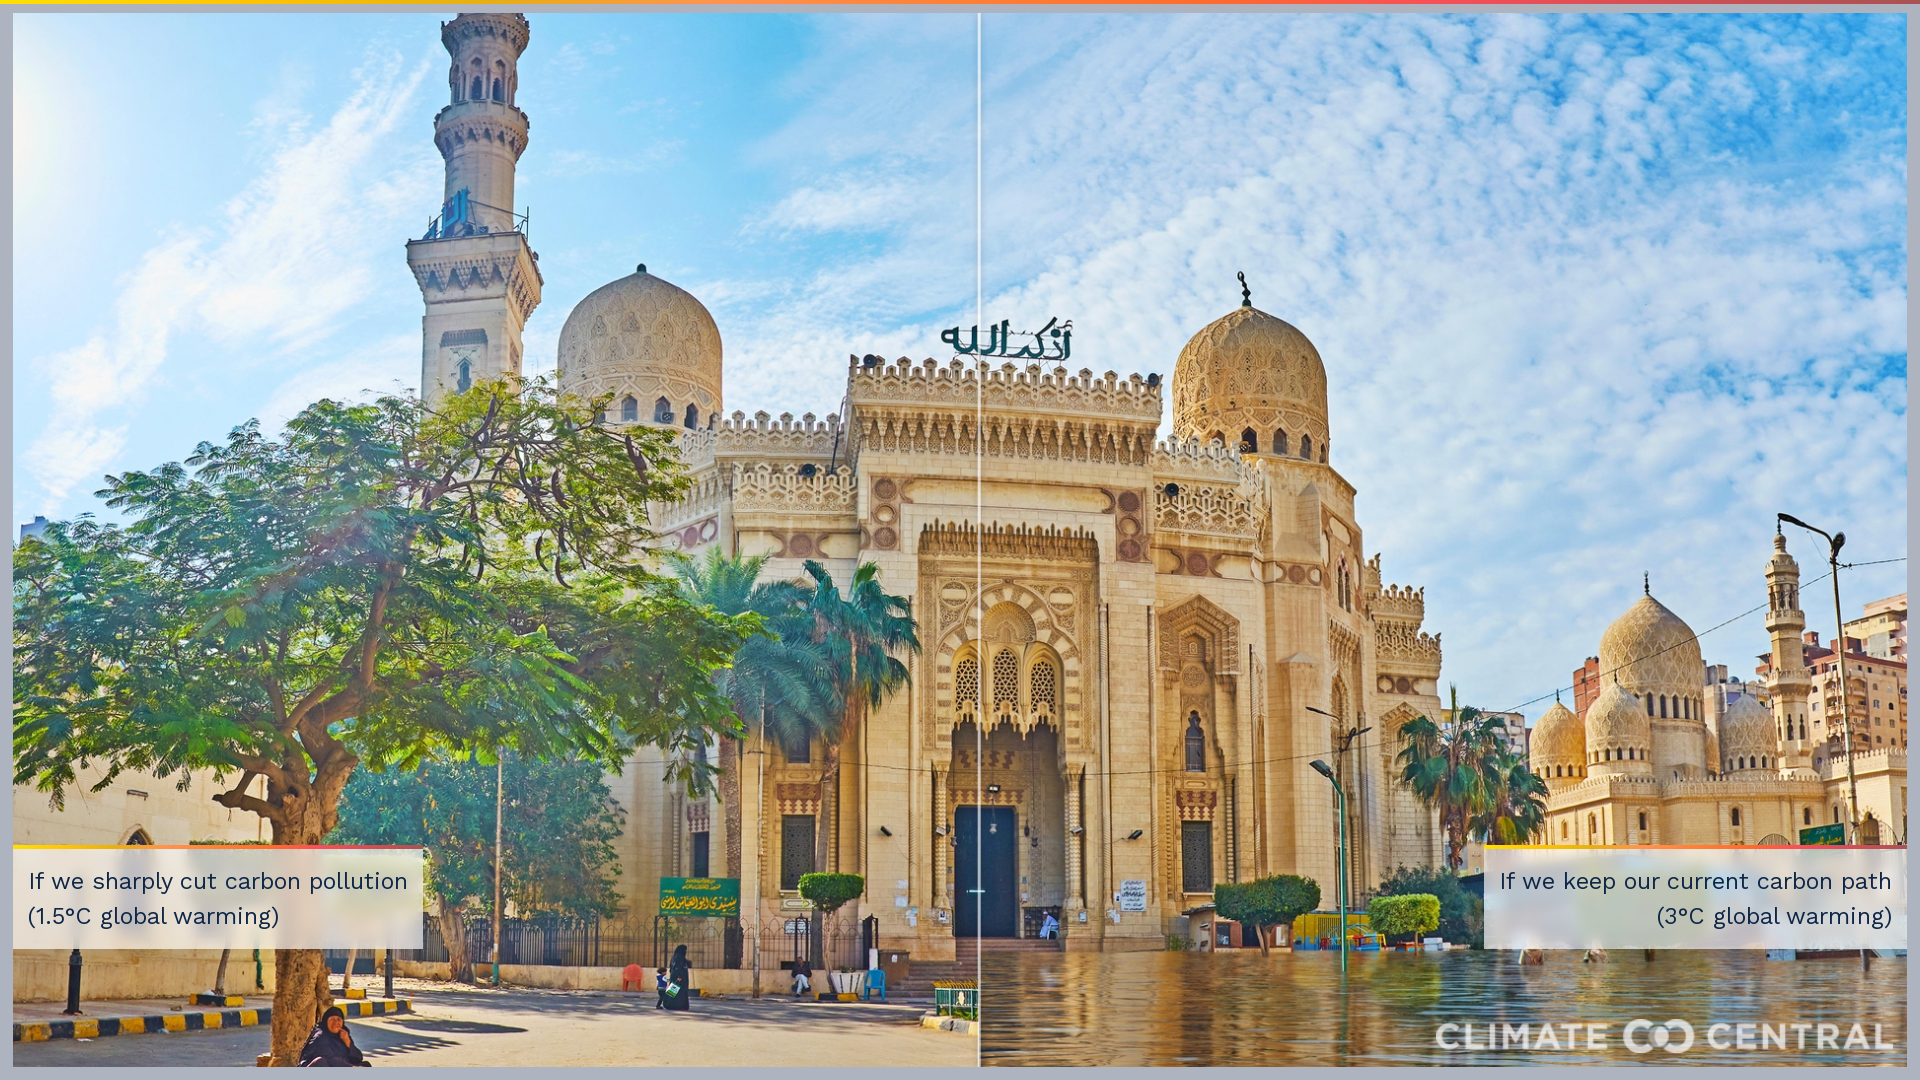 Water levels at the Abu Al-Abbas Al-Mursi Mosque in Alexandria, Egypt if global warming hits 1.5C (left) or 3C (right).